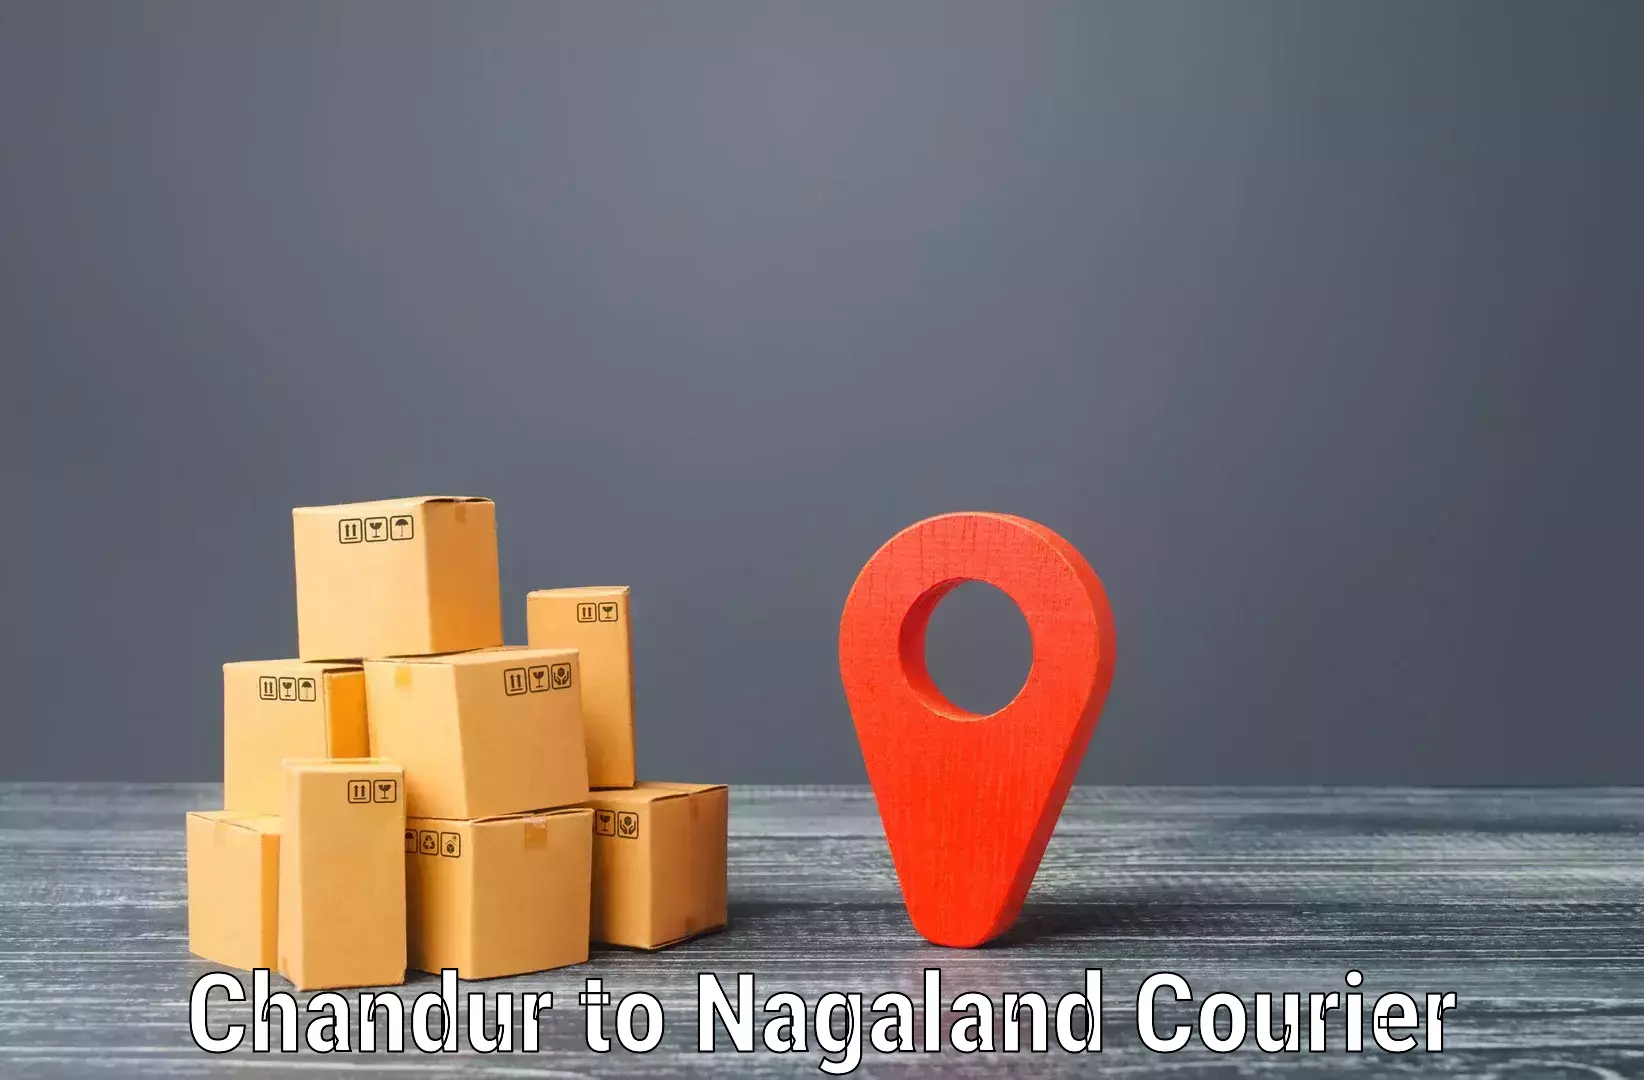 Parcel handling and care Chandur to Nagaland